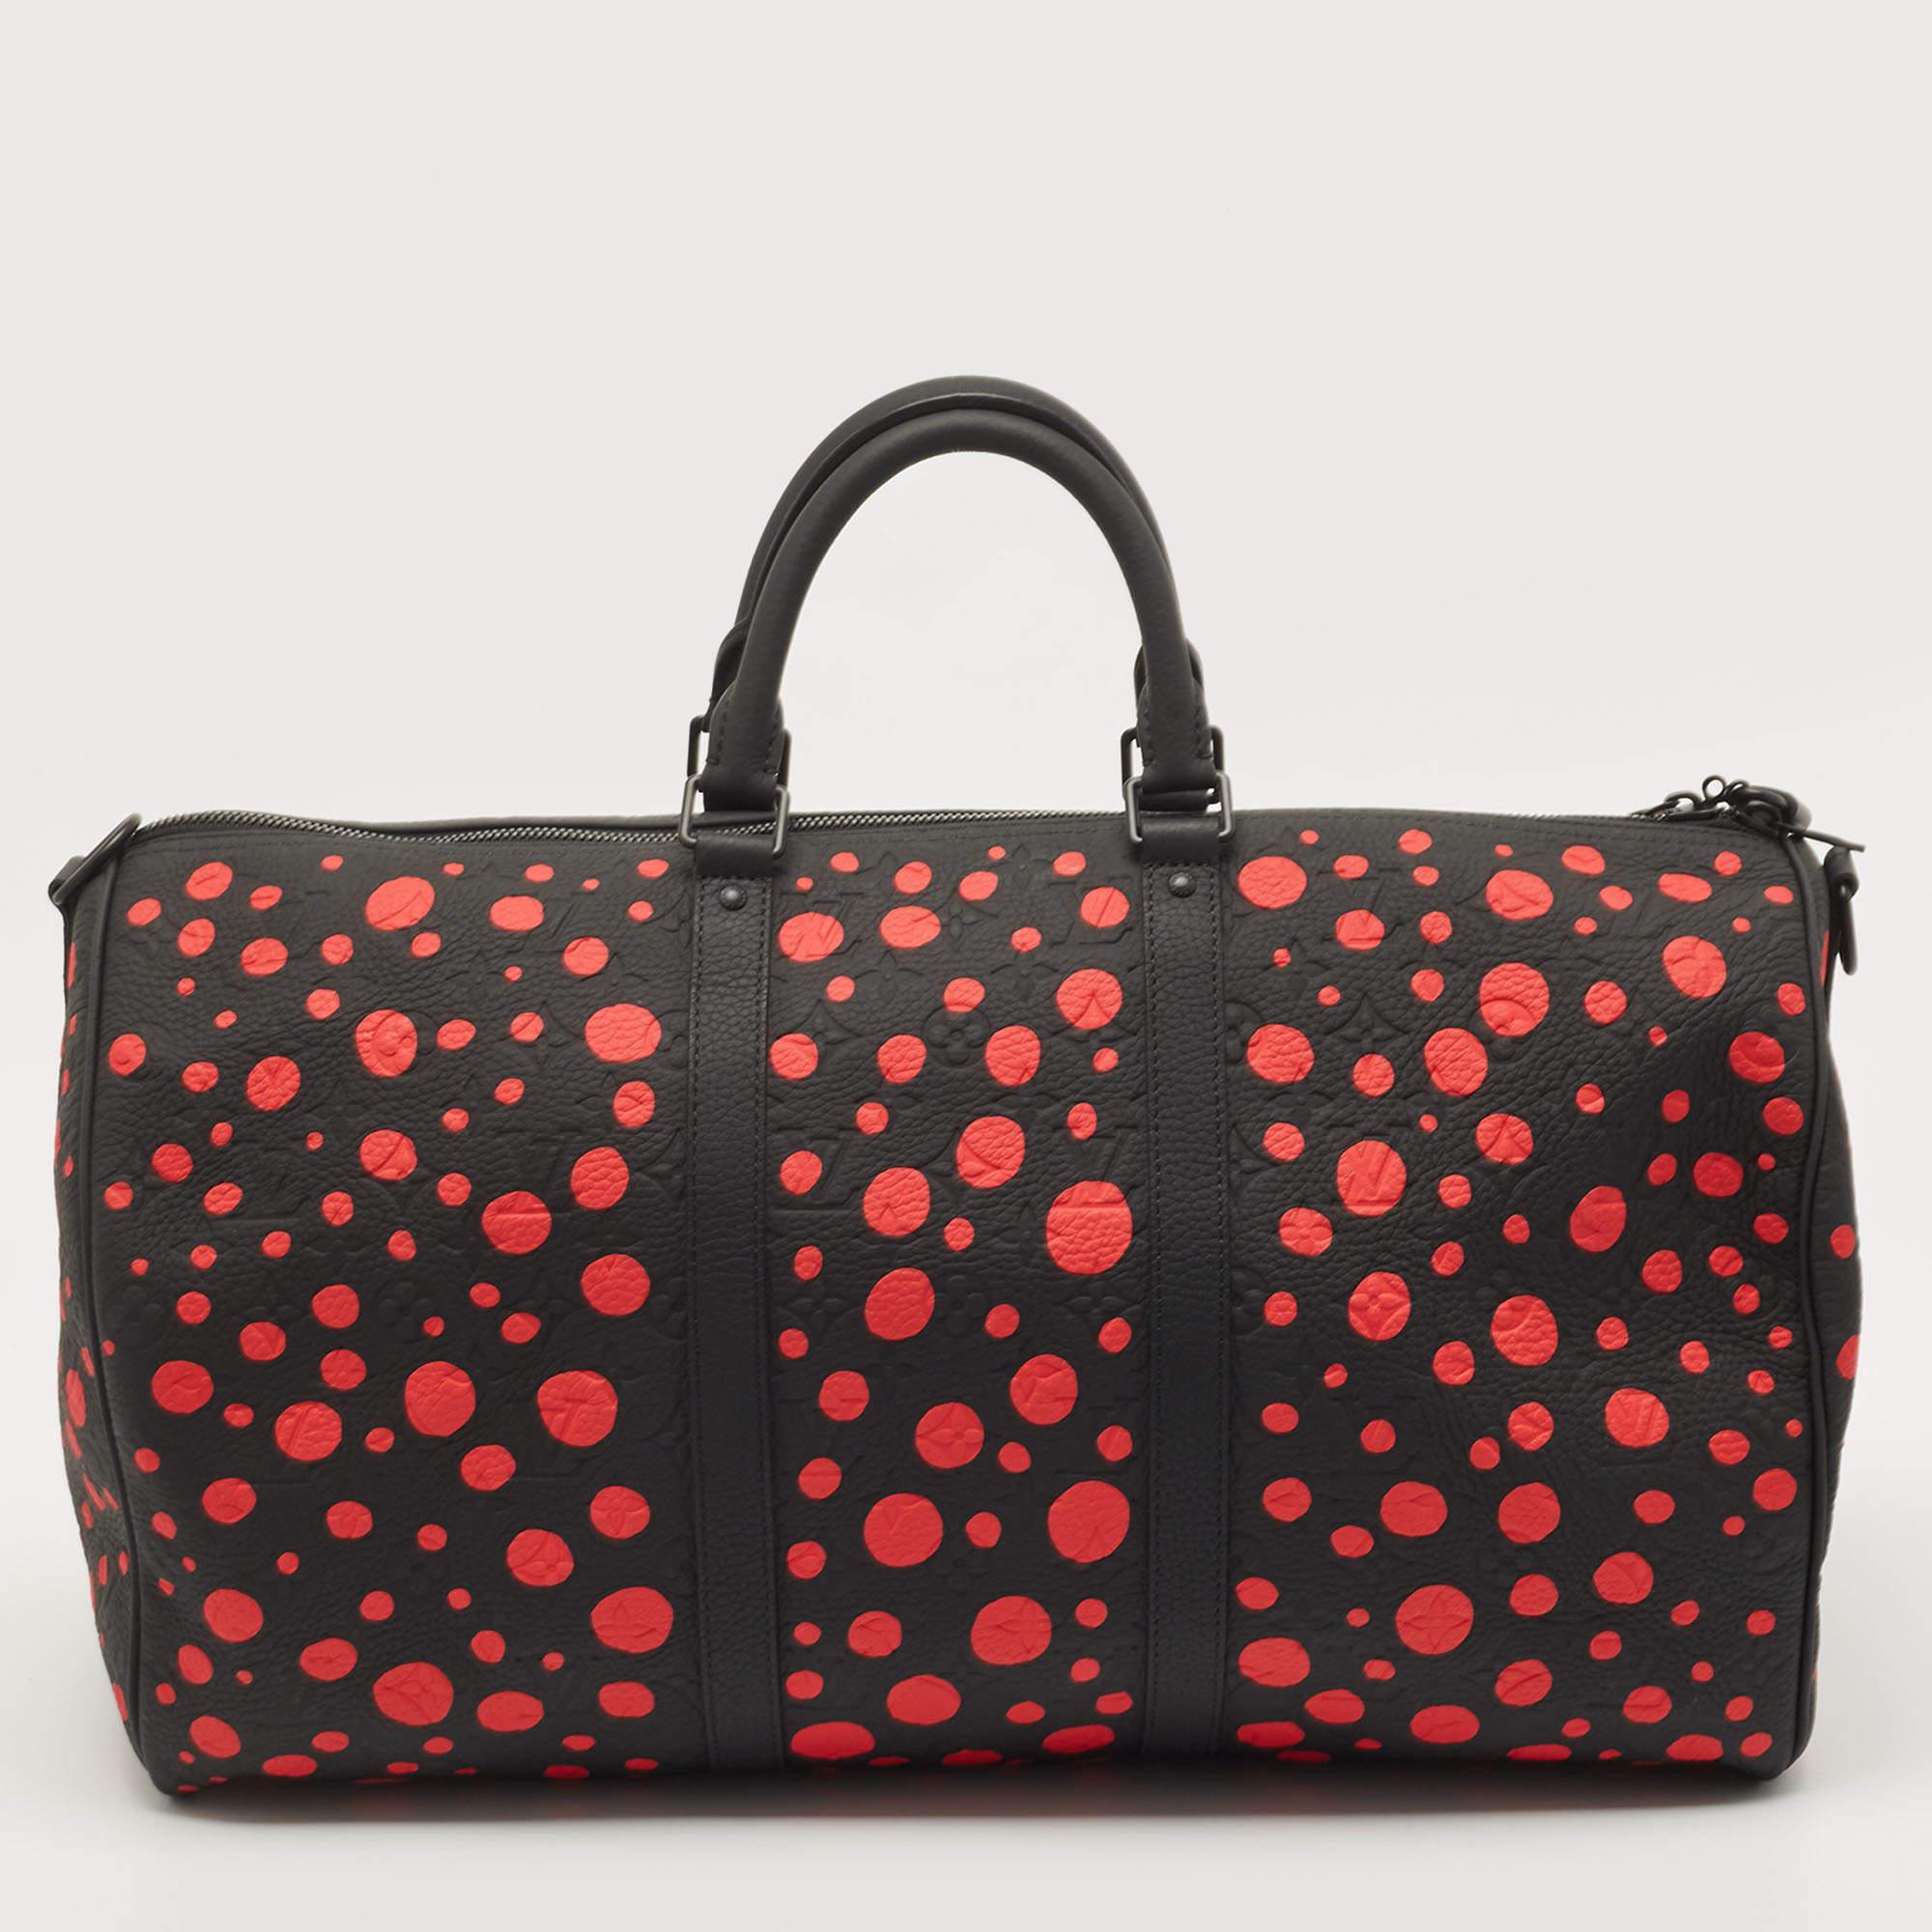 This Keepall 50 was made in collaboration with famed Japanese artist Yayoi Kusama. Dominated by the artist's signature polka dots, the bag makes a statement of art and fashion. This Keepall 30 is from that limited range, and it has been crafted from